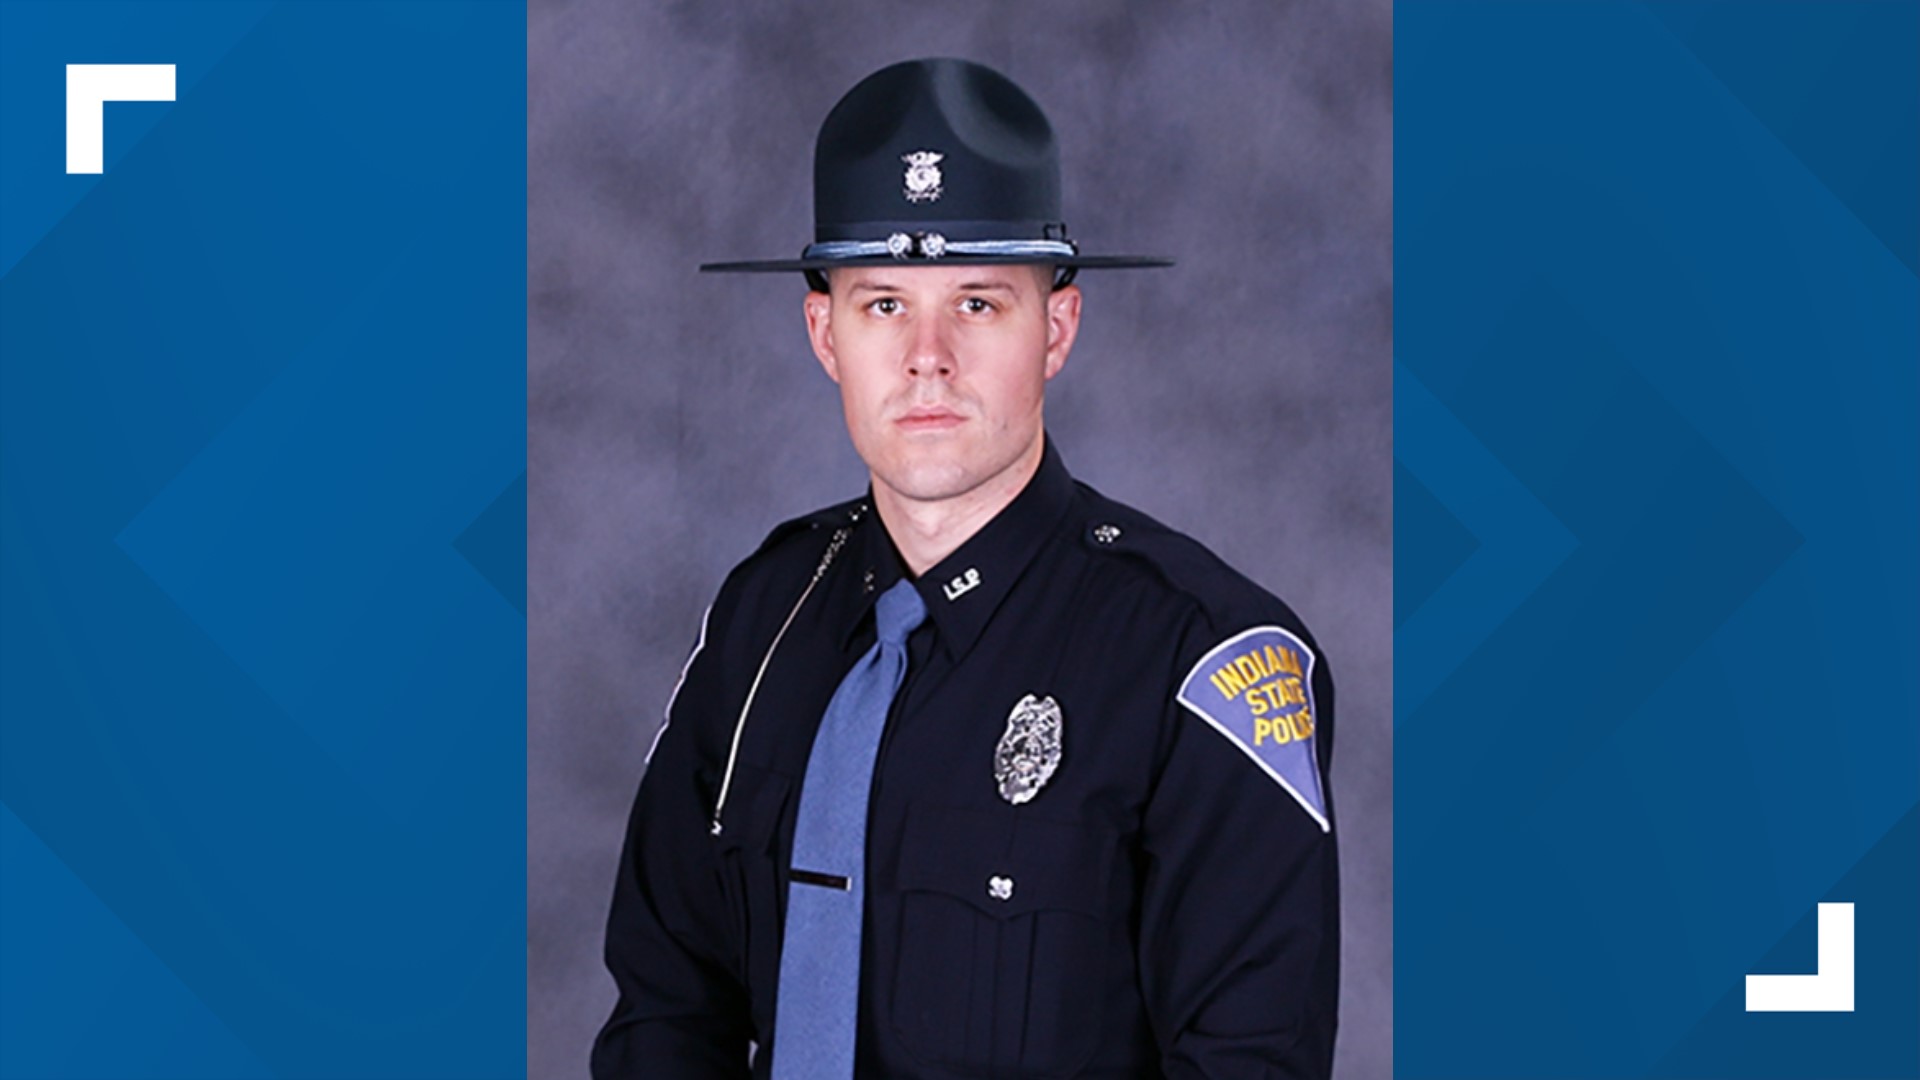 Smith was trying to stop a stolen vehicle that was leading police on a chase. He stepped out of his vehicle to deploy stop sticks when he was killed by the suspect.